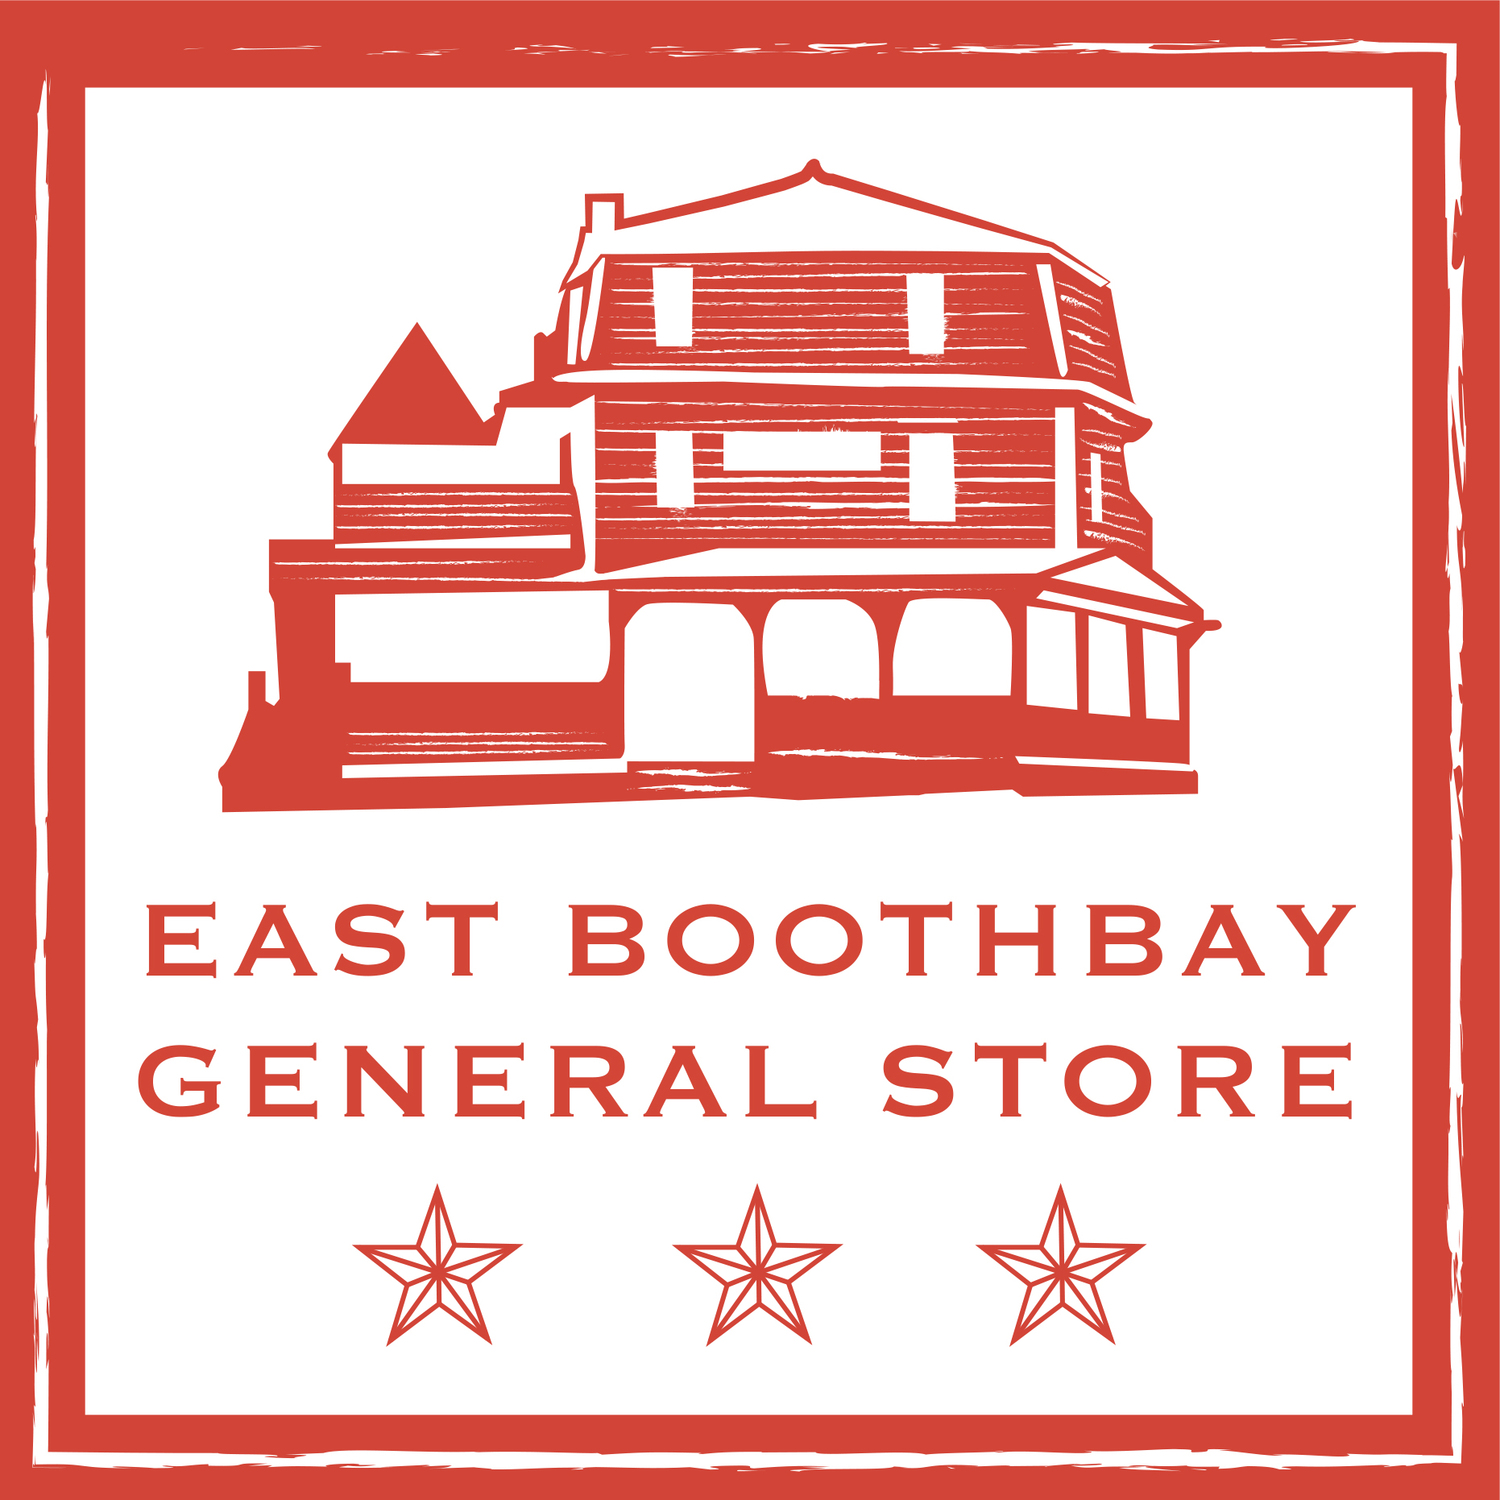 The East Boothbay General Store